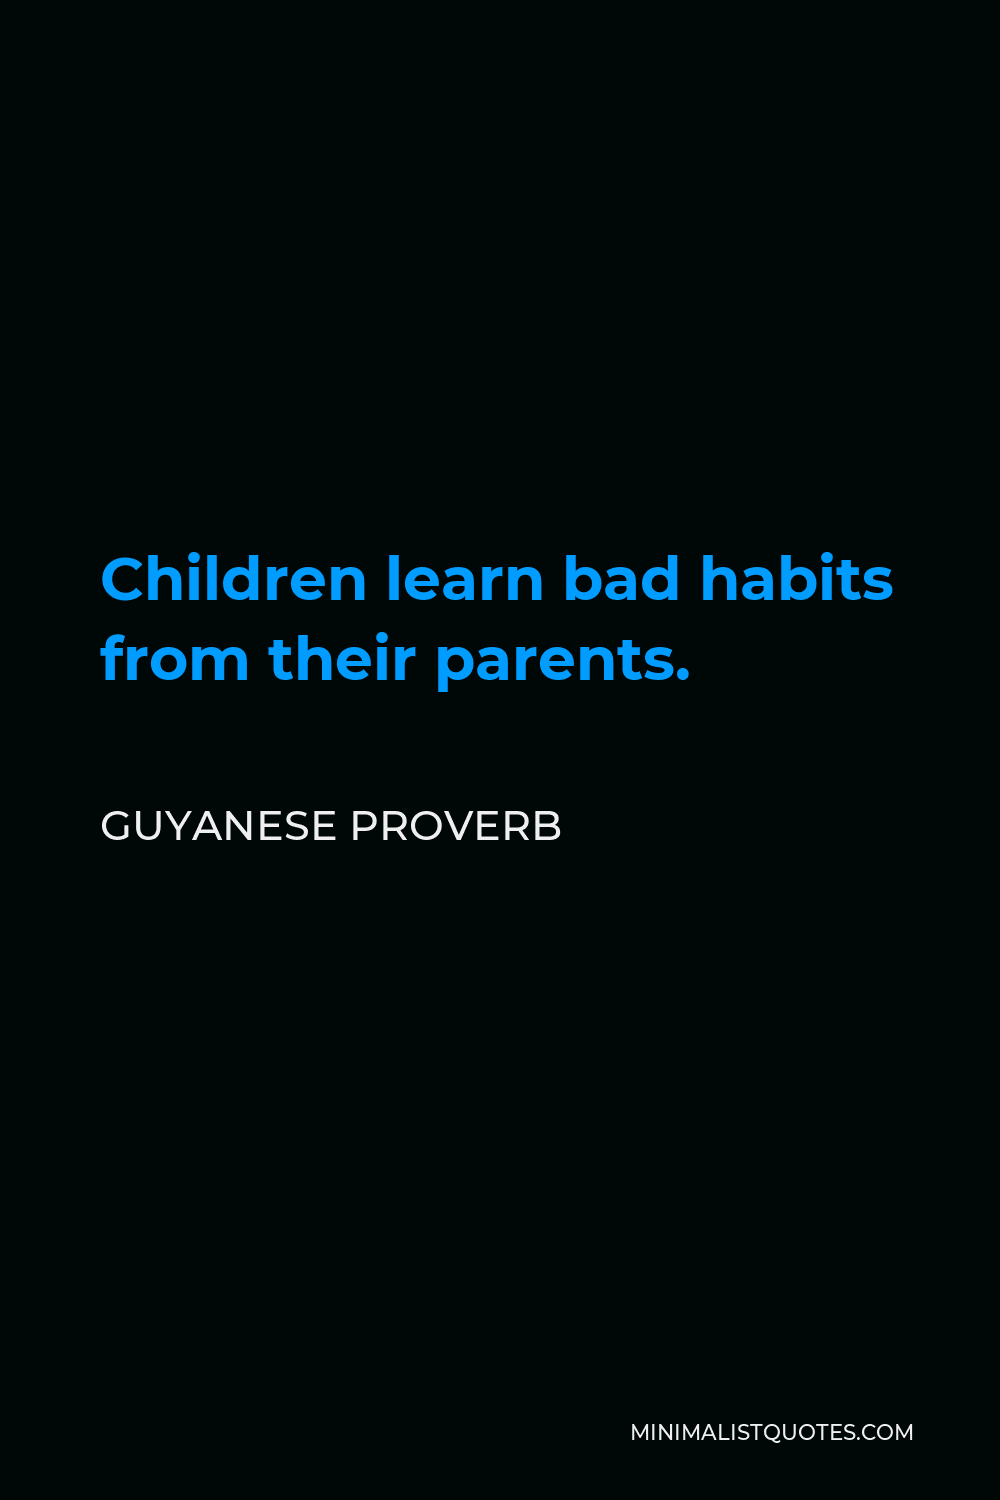 Guyanese Proverb Quote - Children learn bad habits from their parents.